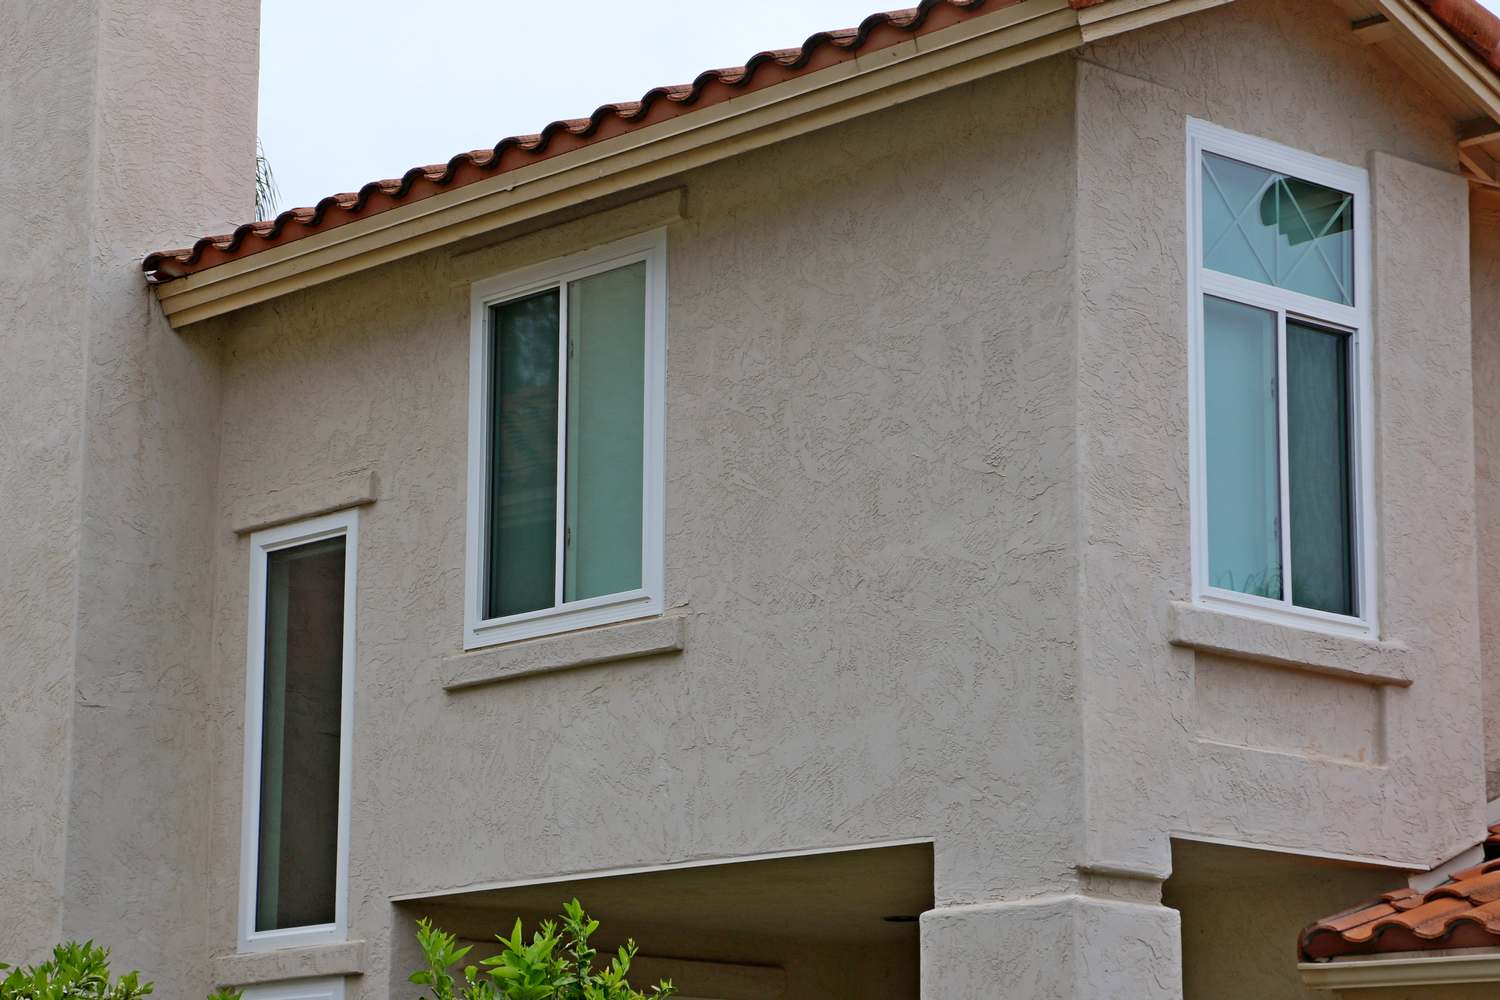 Anlin Window Replacement in Scripps Ranch, CA